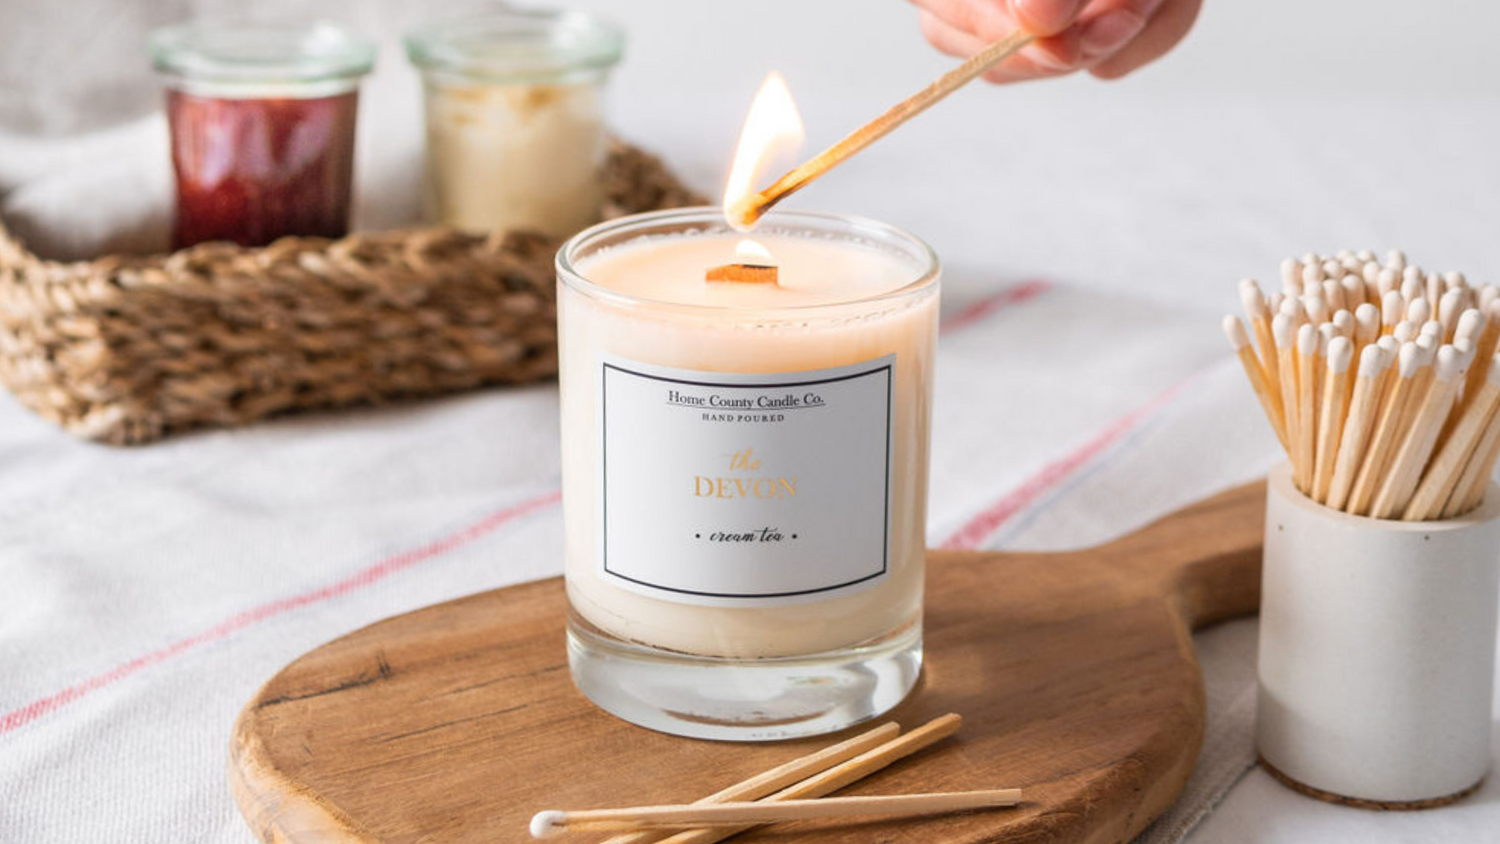 The Devon Cream Tea scented candle from Home County Co is shown being lit with a long match